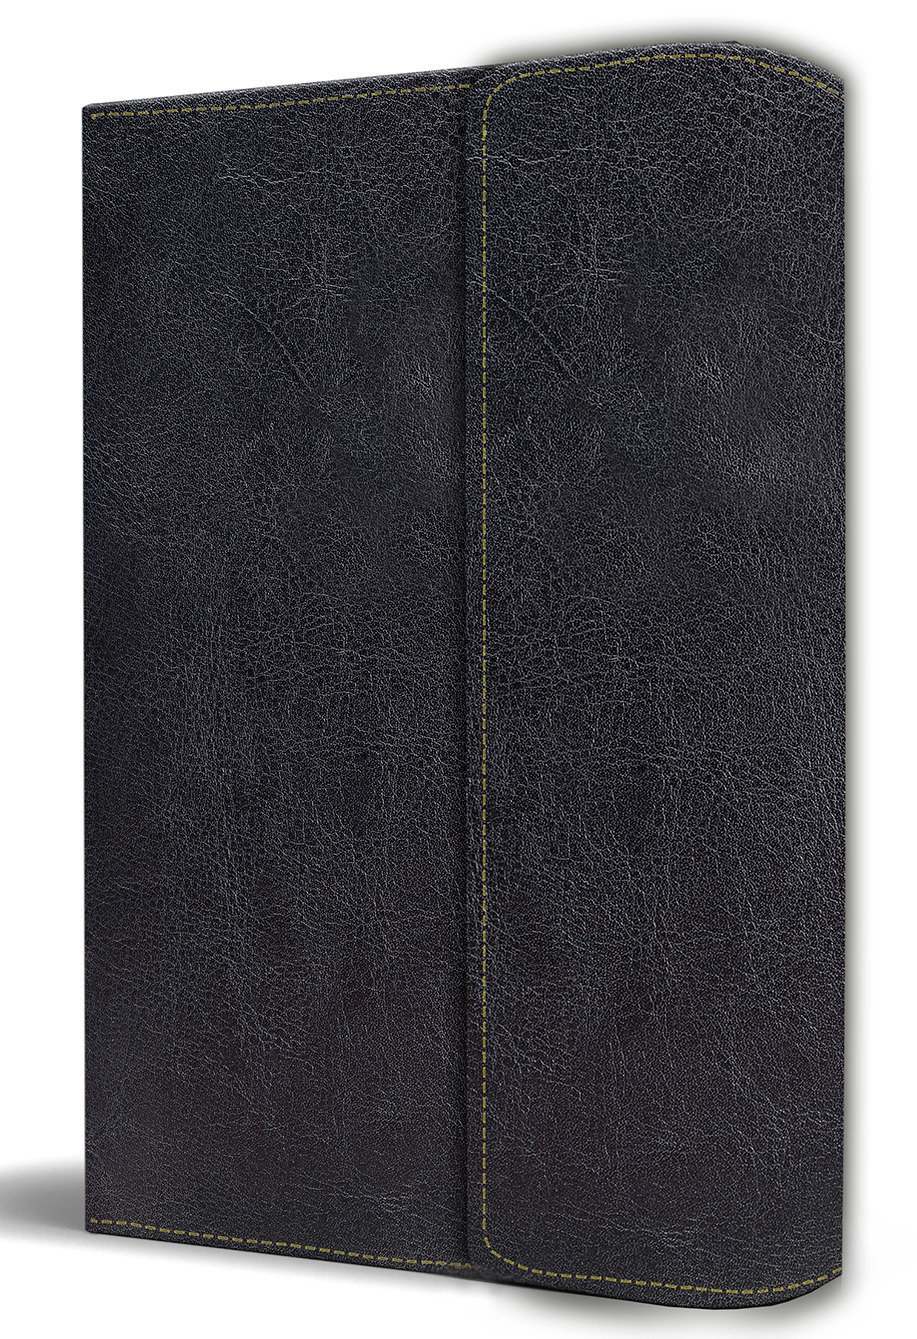 Biblia Rvr 1960 Letra Grande Tamaño Manual, Simil Piel Con Solapa Y Imán/ Spanis H Bible Rvr 1960 Handy Size Large Print Leathersoft With Magnetic Flap (Hardcover Book)